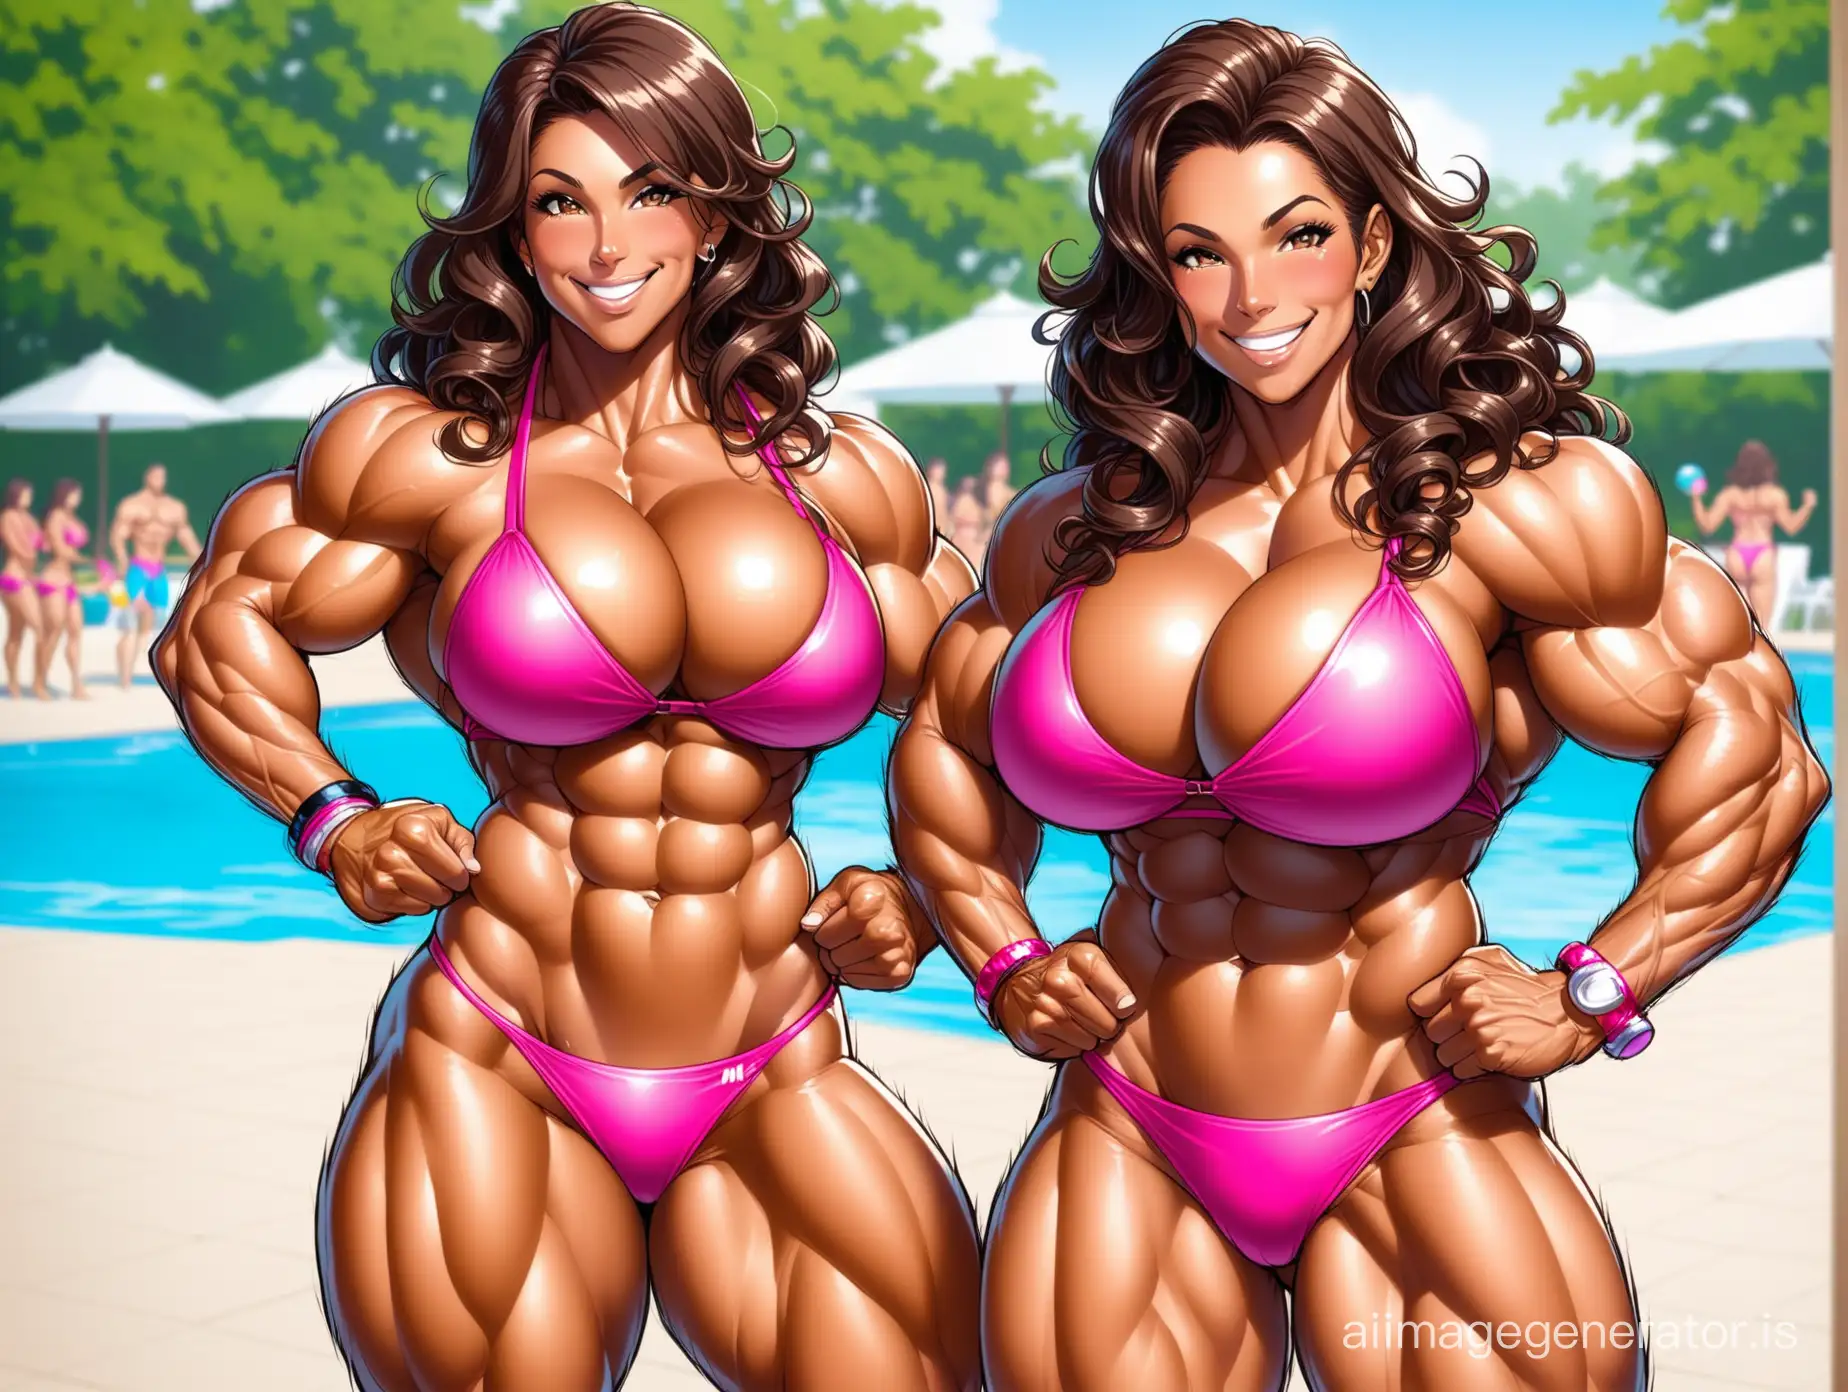 muscle female babe calves abs delts ((tanned skin)) wear tight pink bikini thick legs thick muscles thick arms big boobs crazy smile ((extremely ripped body)) long curly brown hair milf pool party
